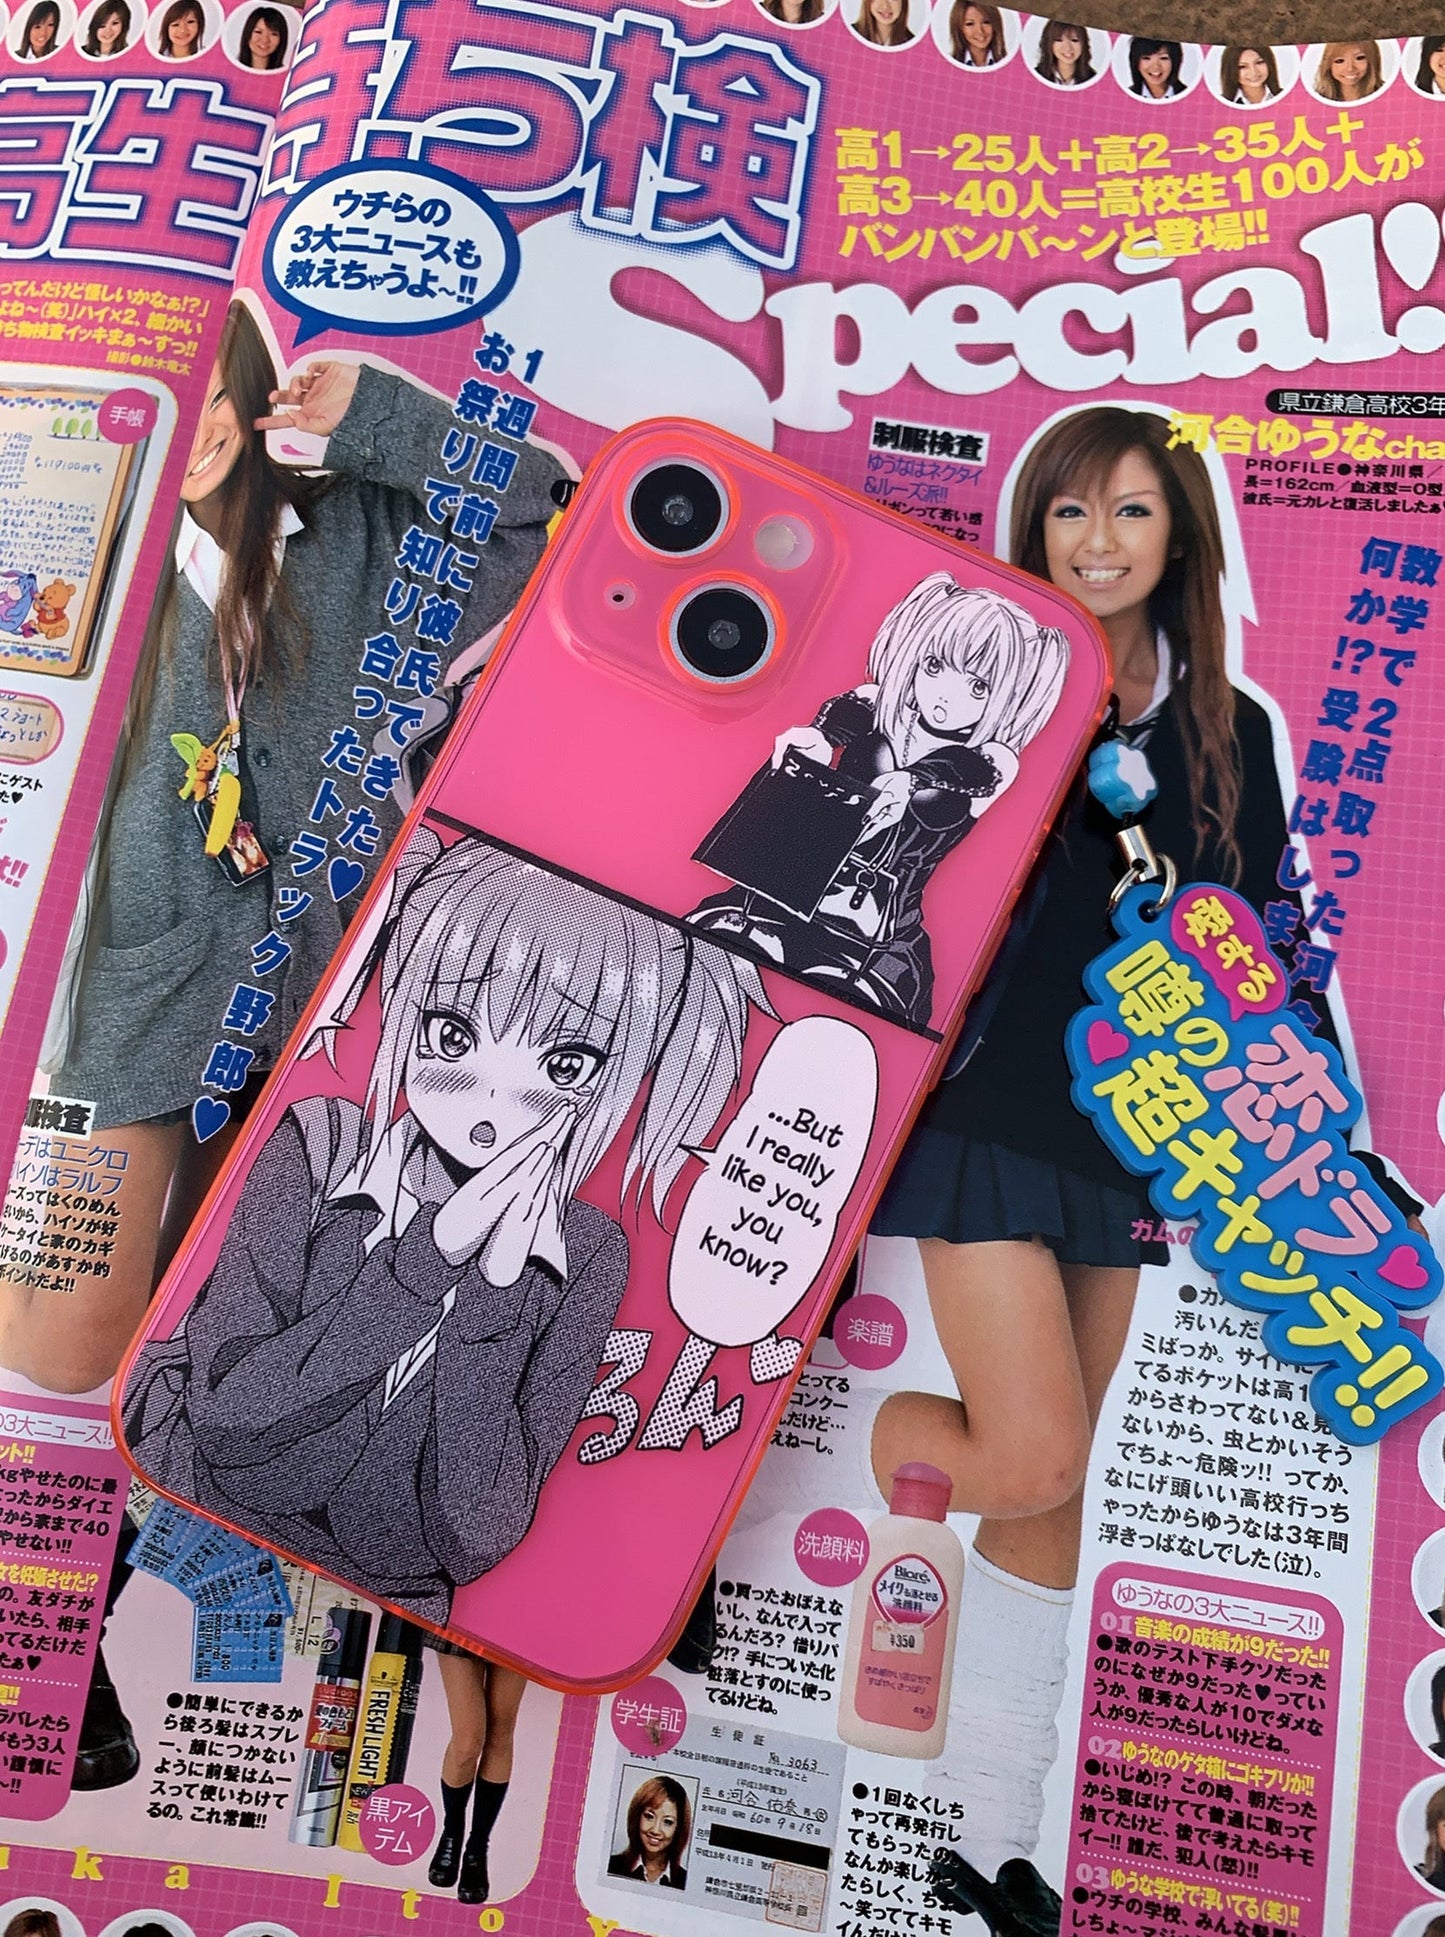 Phone Case Pink MisaMisa with Pendant